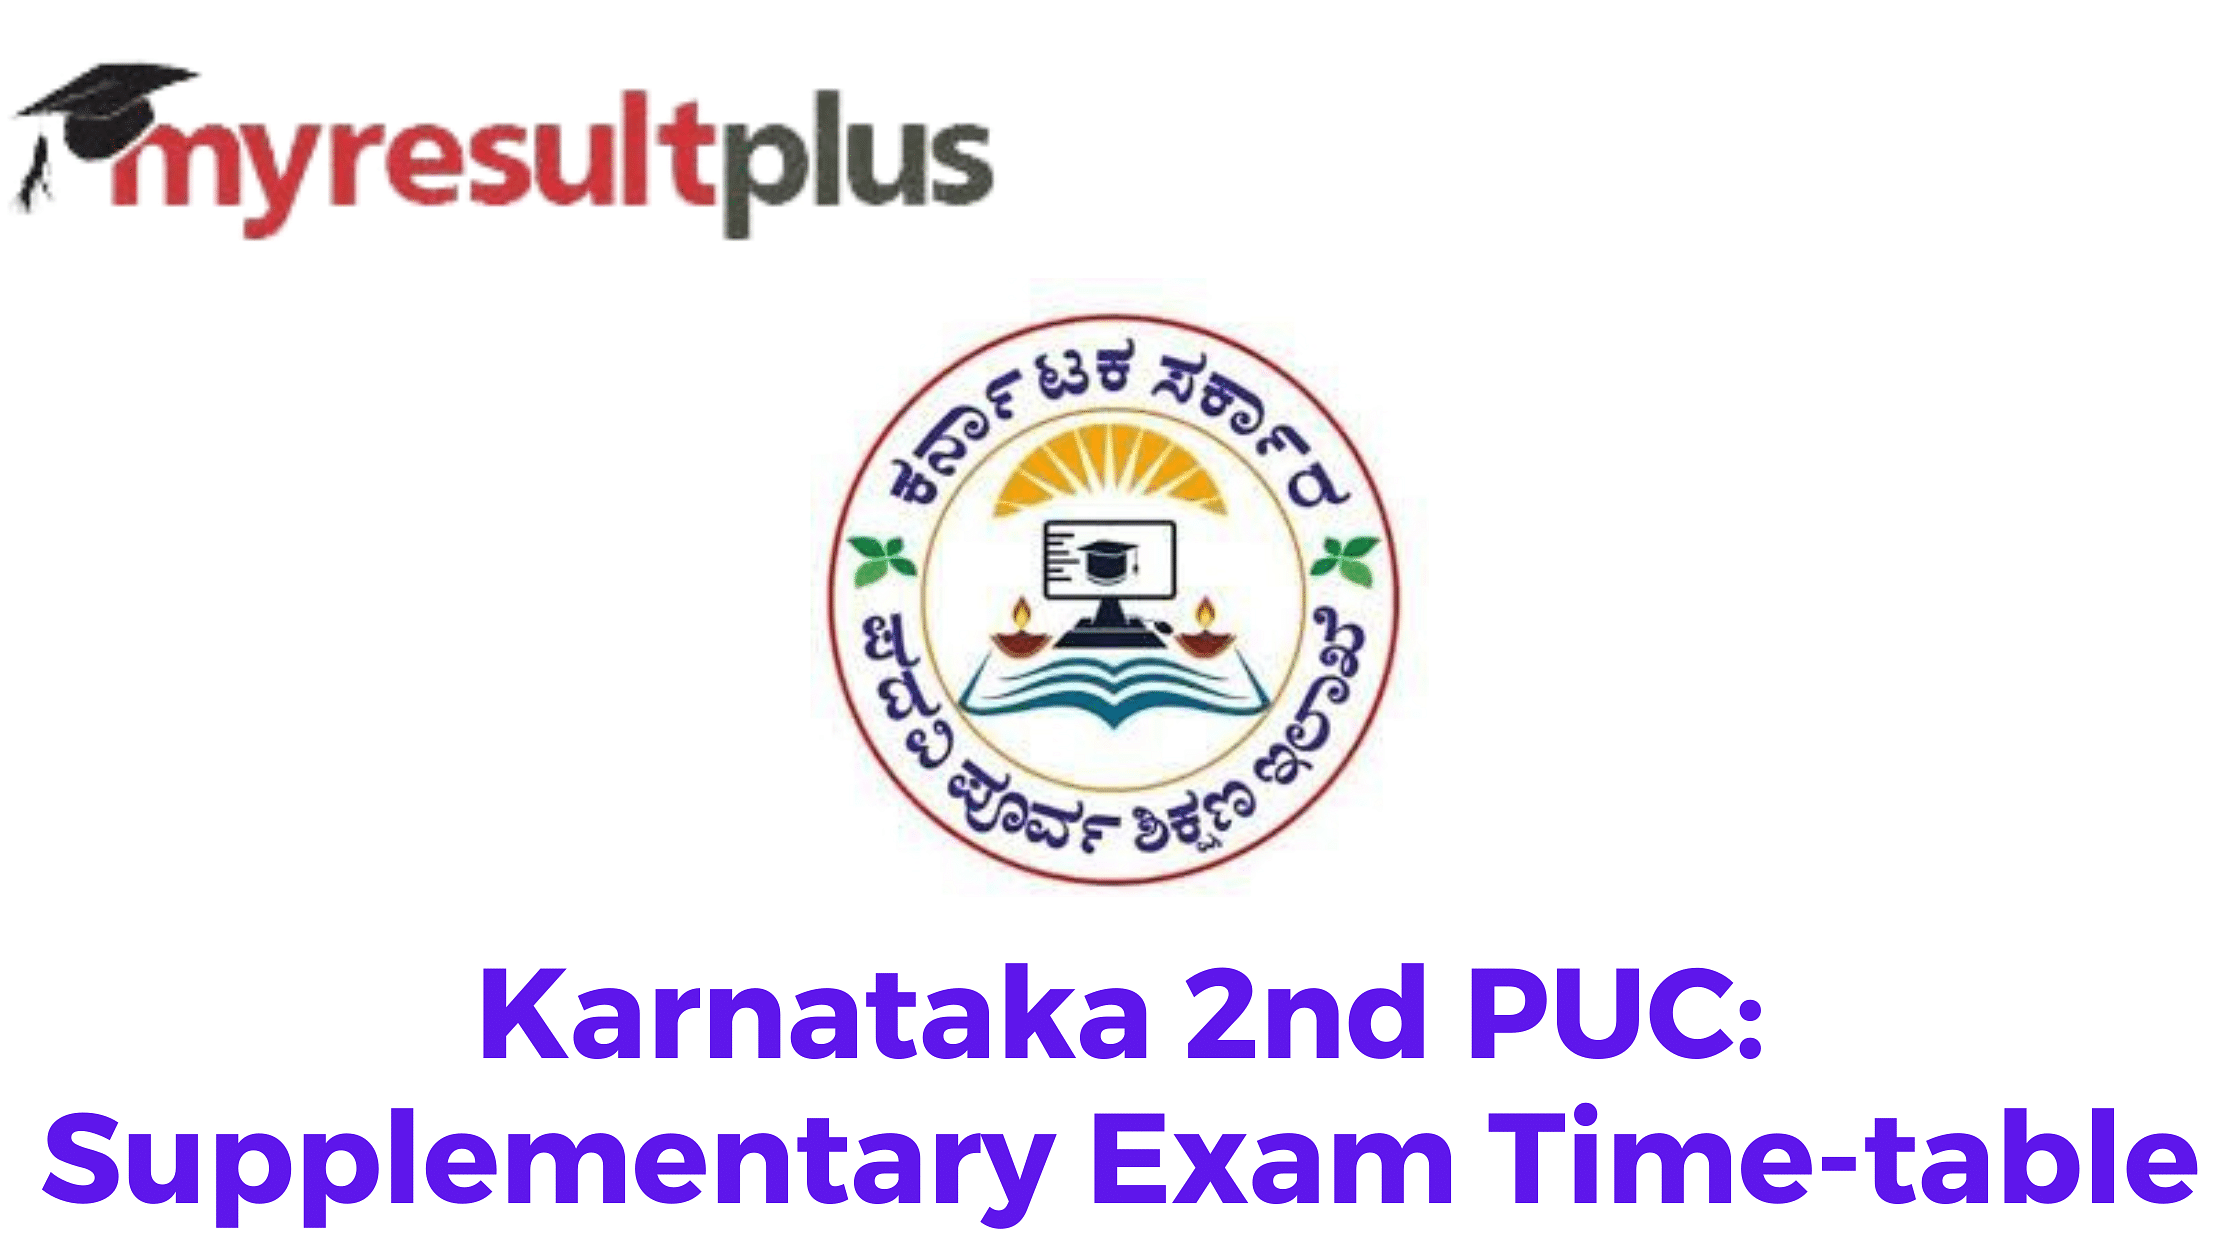 Karnataka PUC 2022: Supplementary Exam Dates Announced, Check Complete Schedule Here